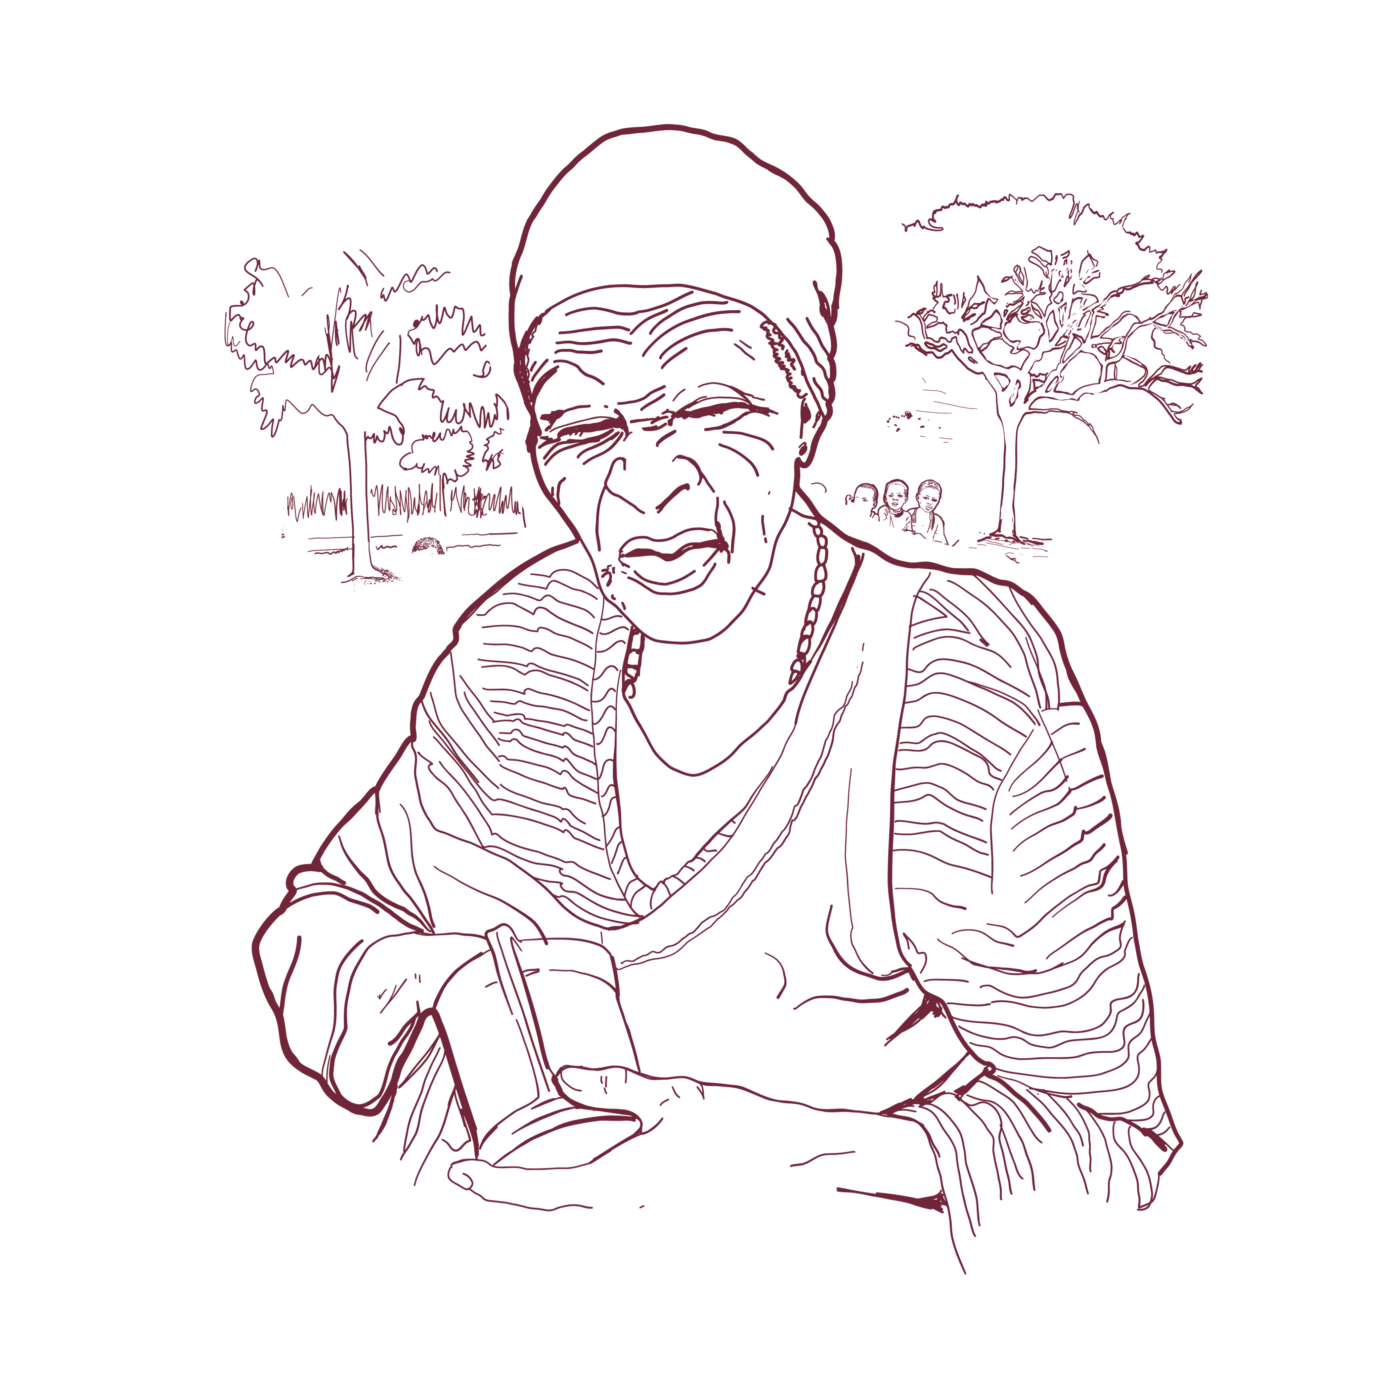 An illustration of an older lady with her eyes lightly closed. She is cleaning a mug and looking troubled.